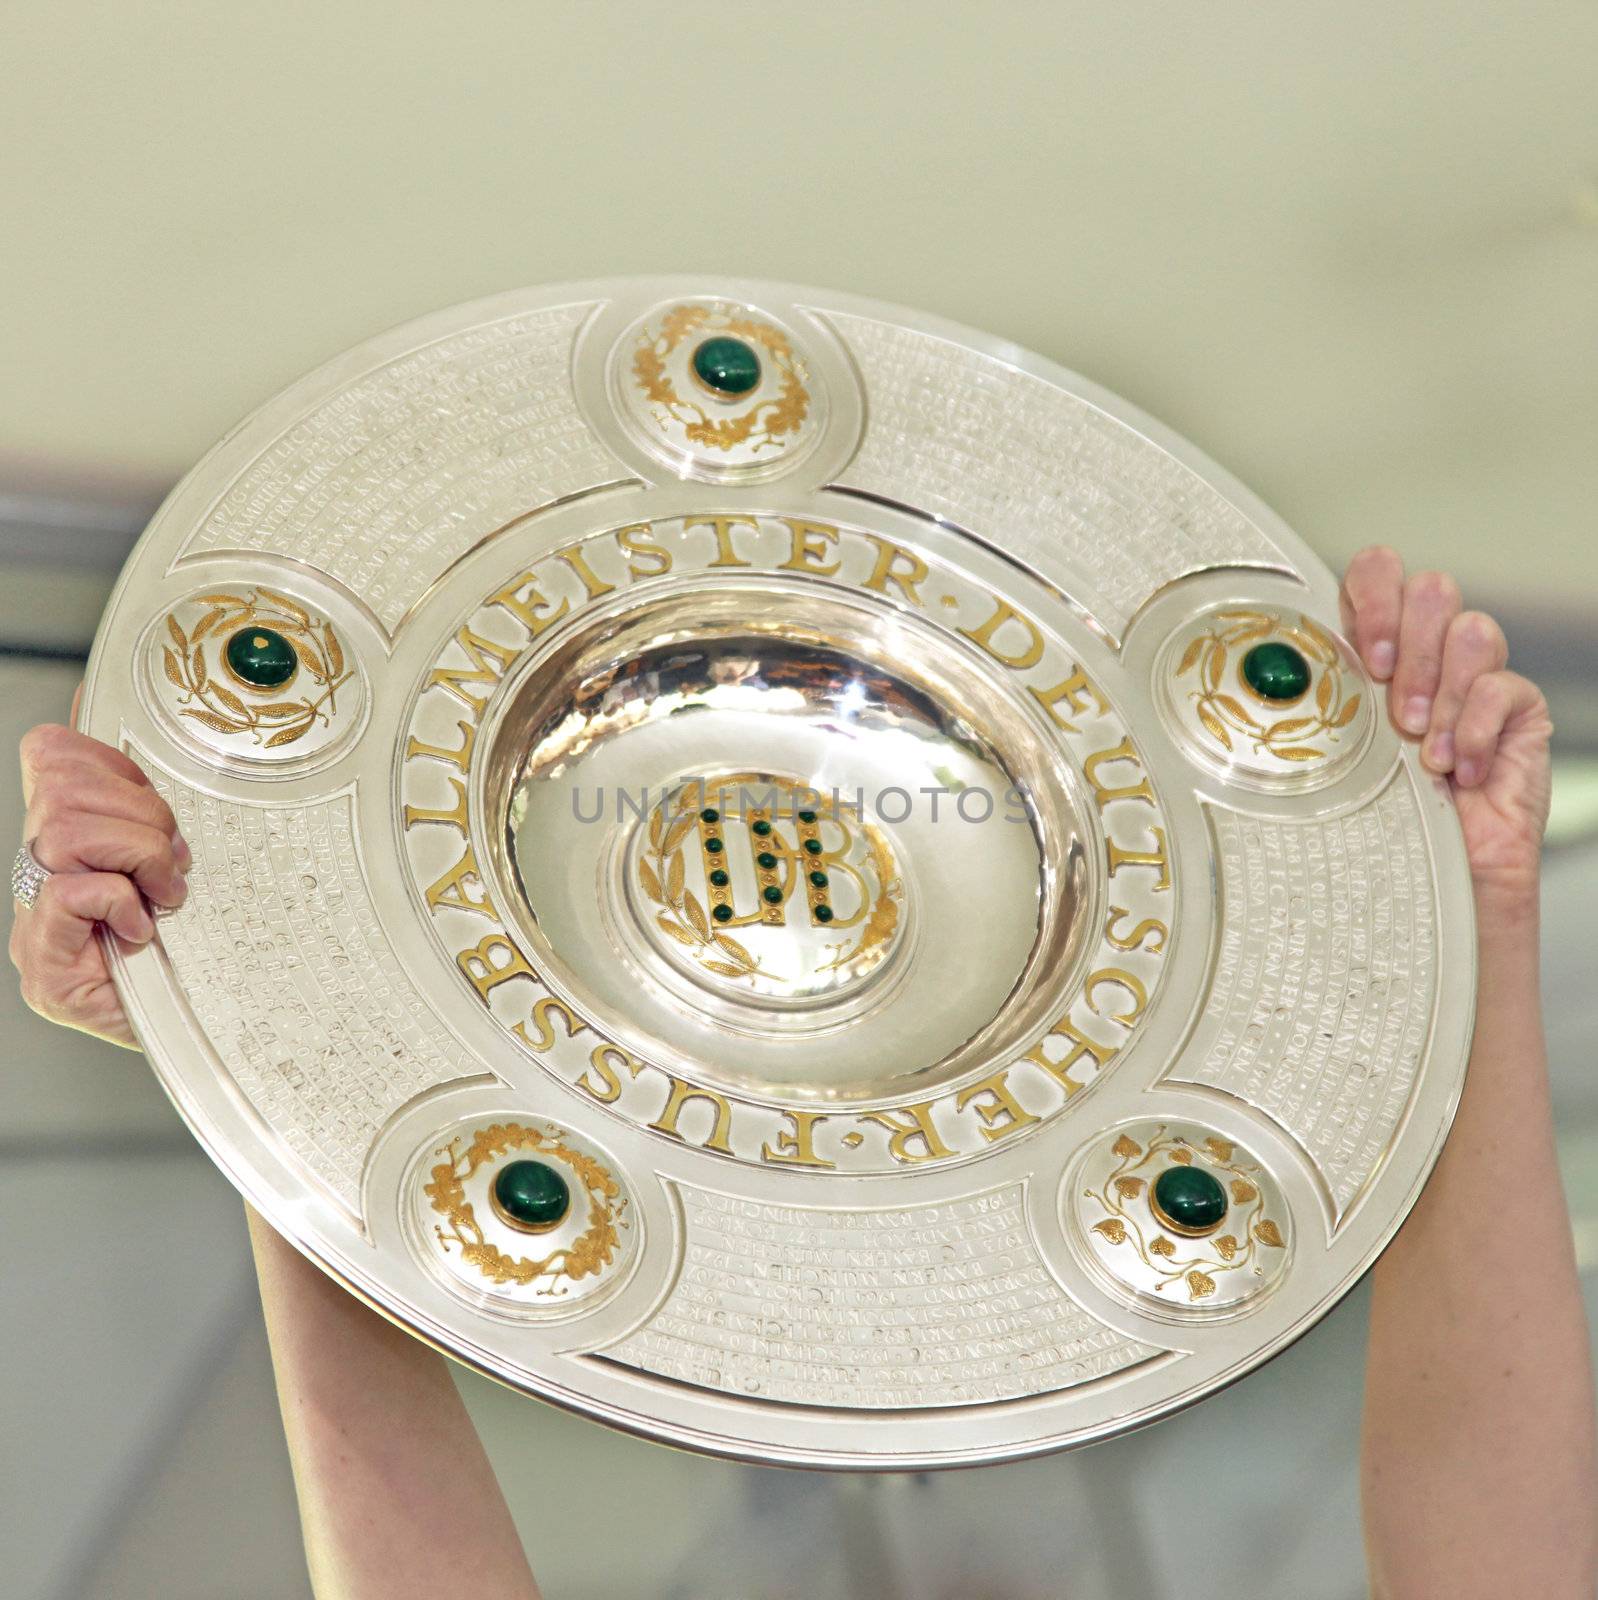 Championship trophy - the German soccer cup by Farina6000